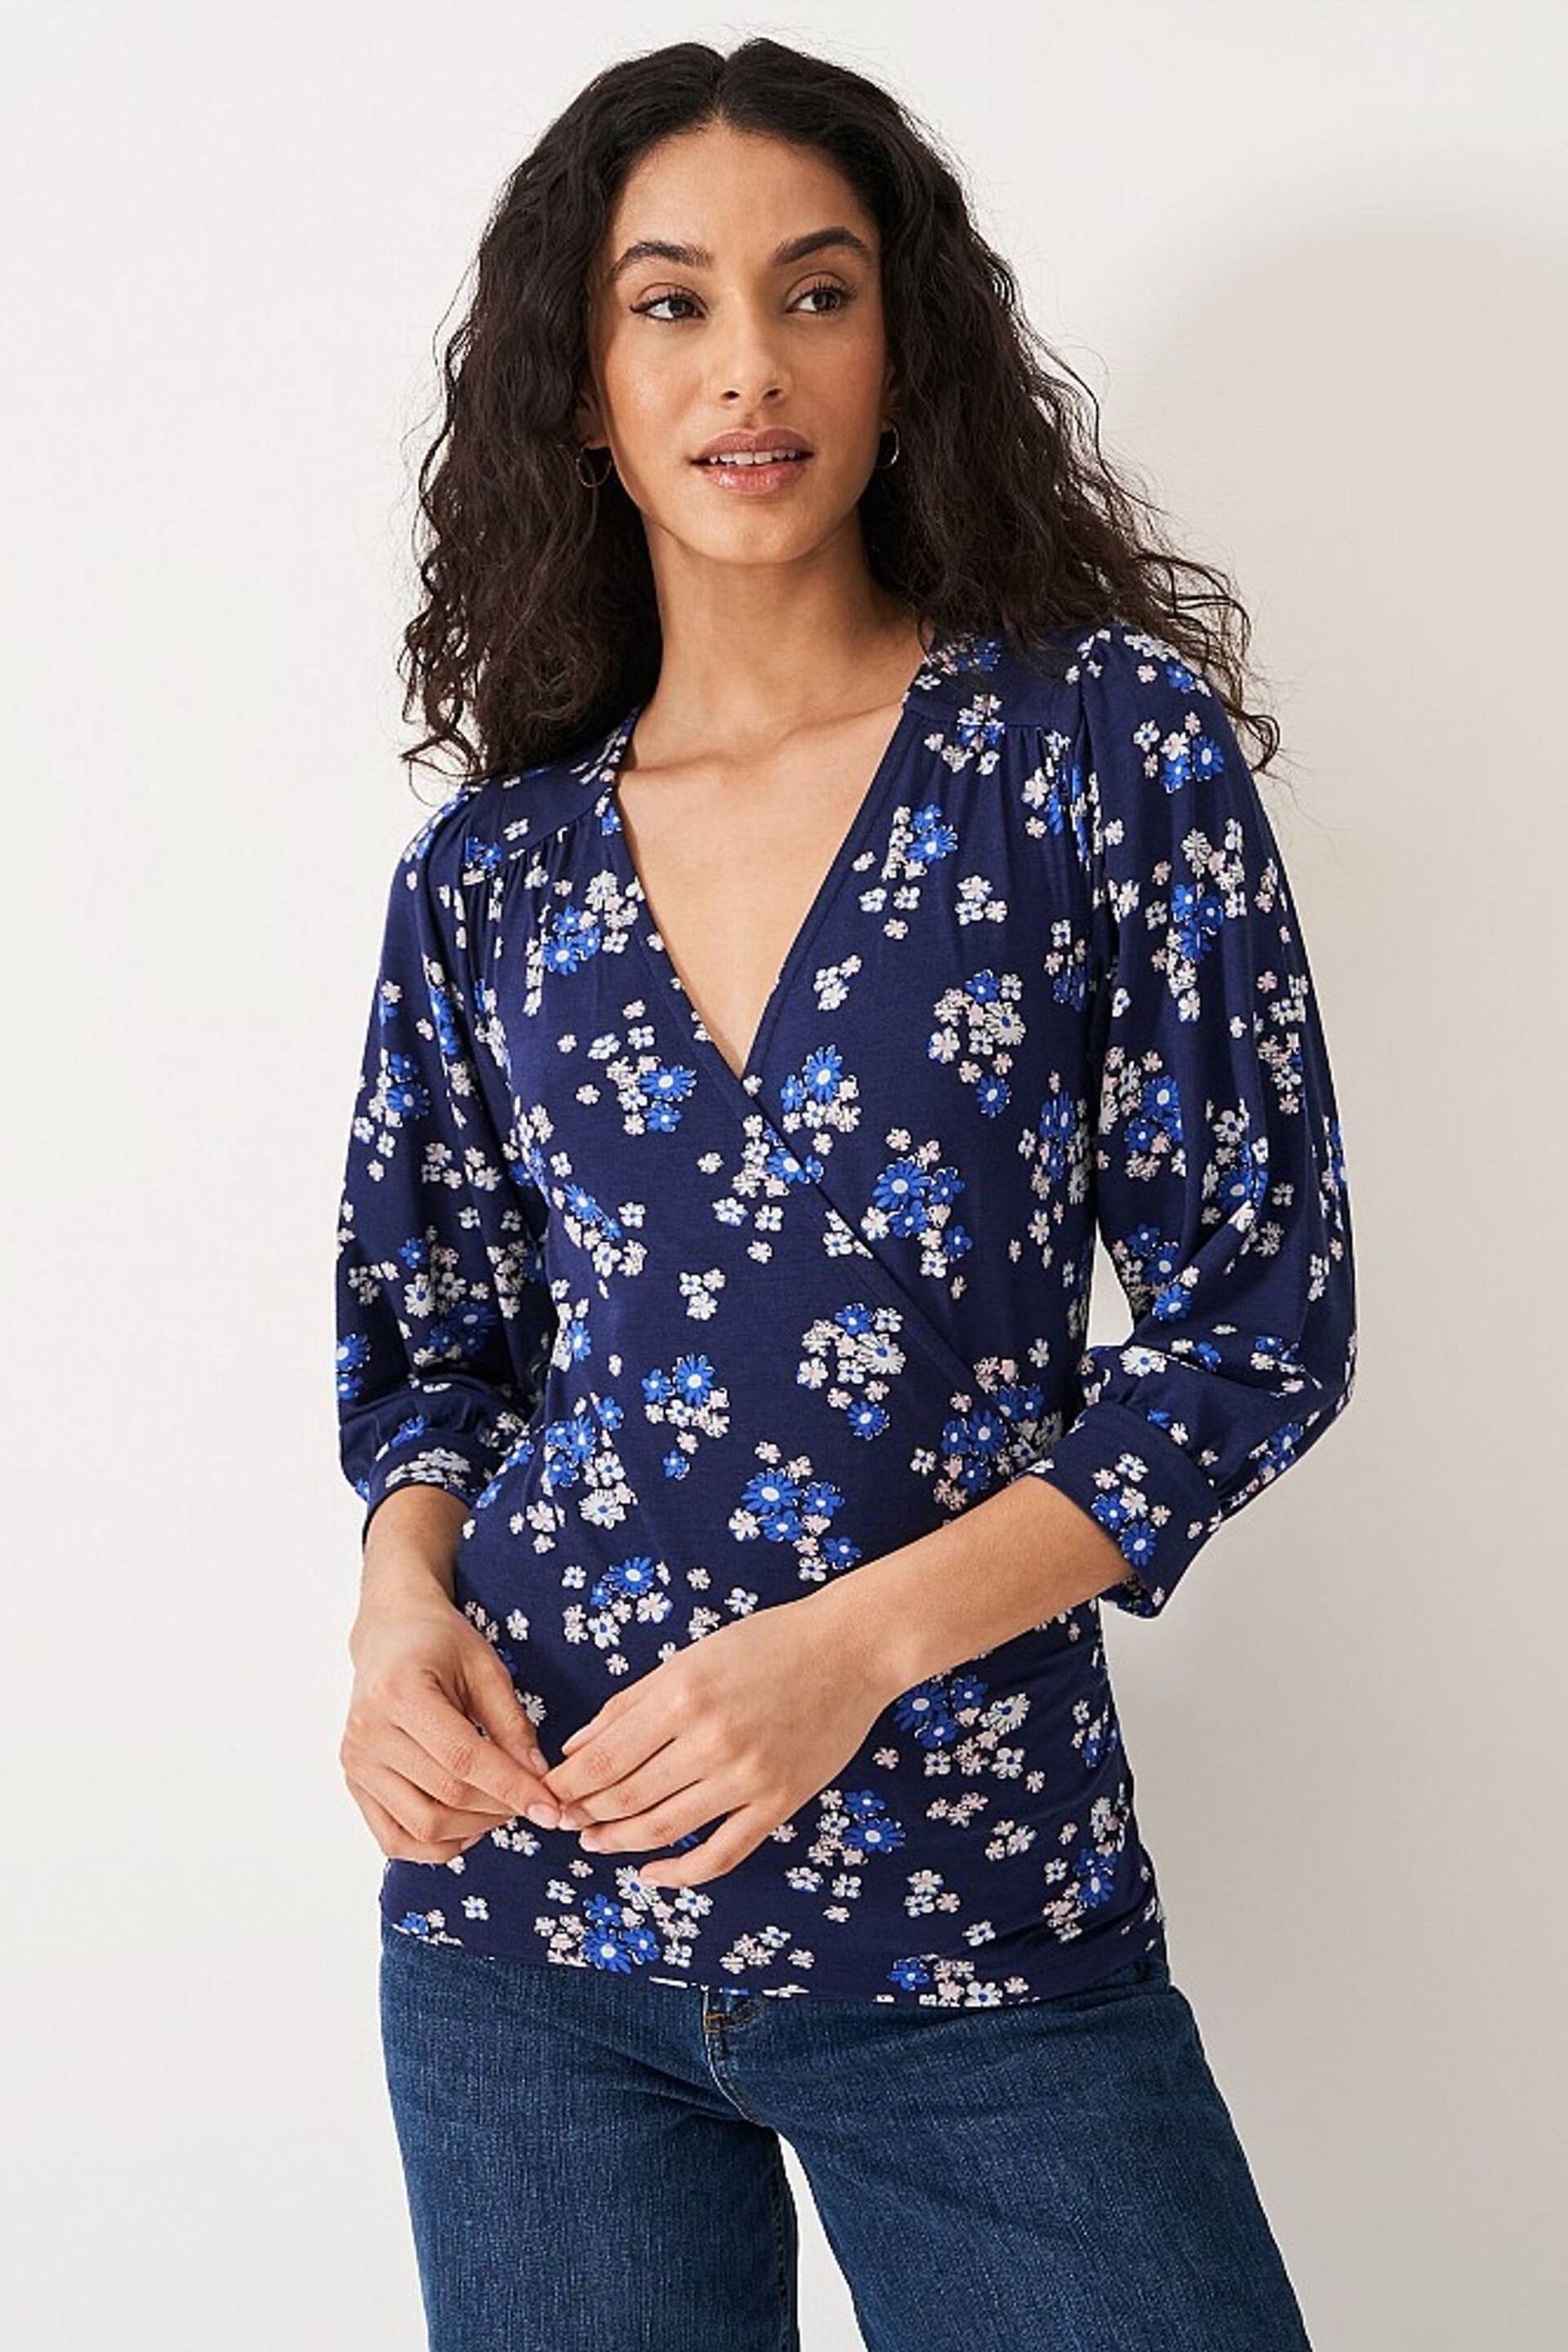 Crew Clothing Floral Jersey Wrap Top - Image 1 of 4